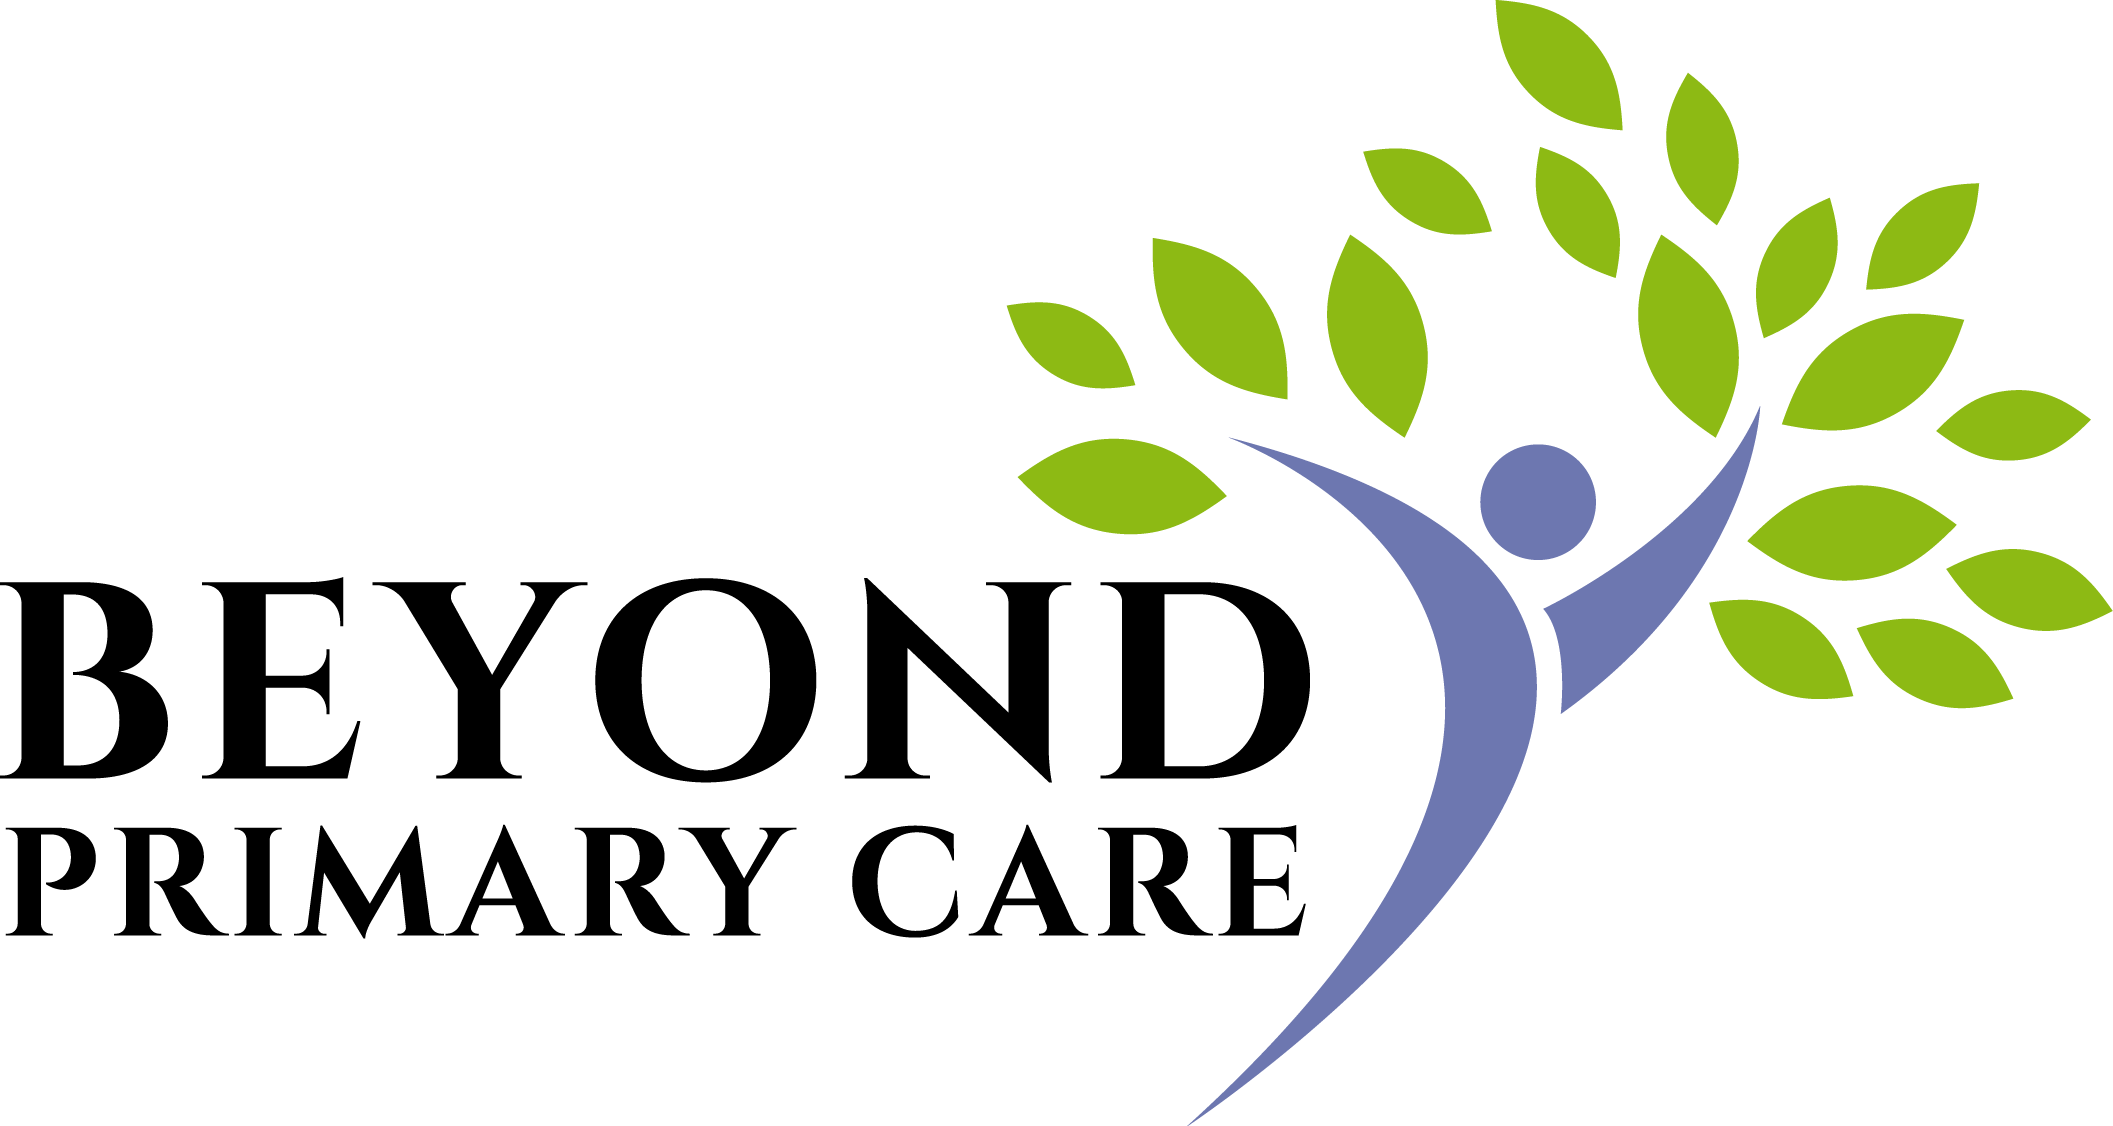 Beyond Primary Care